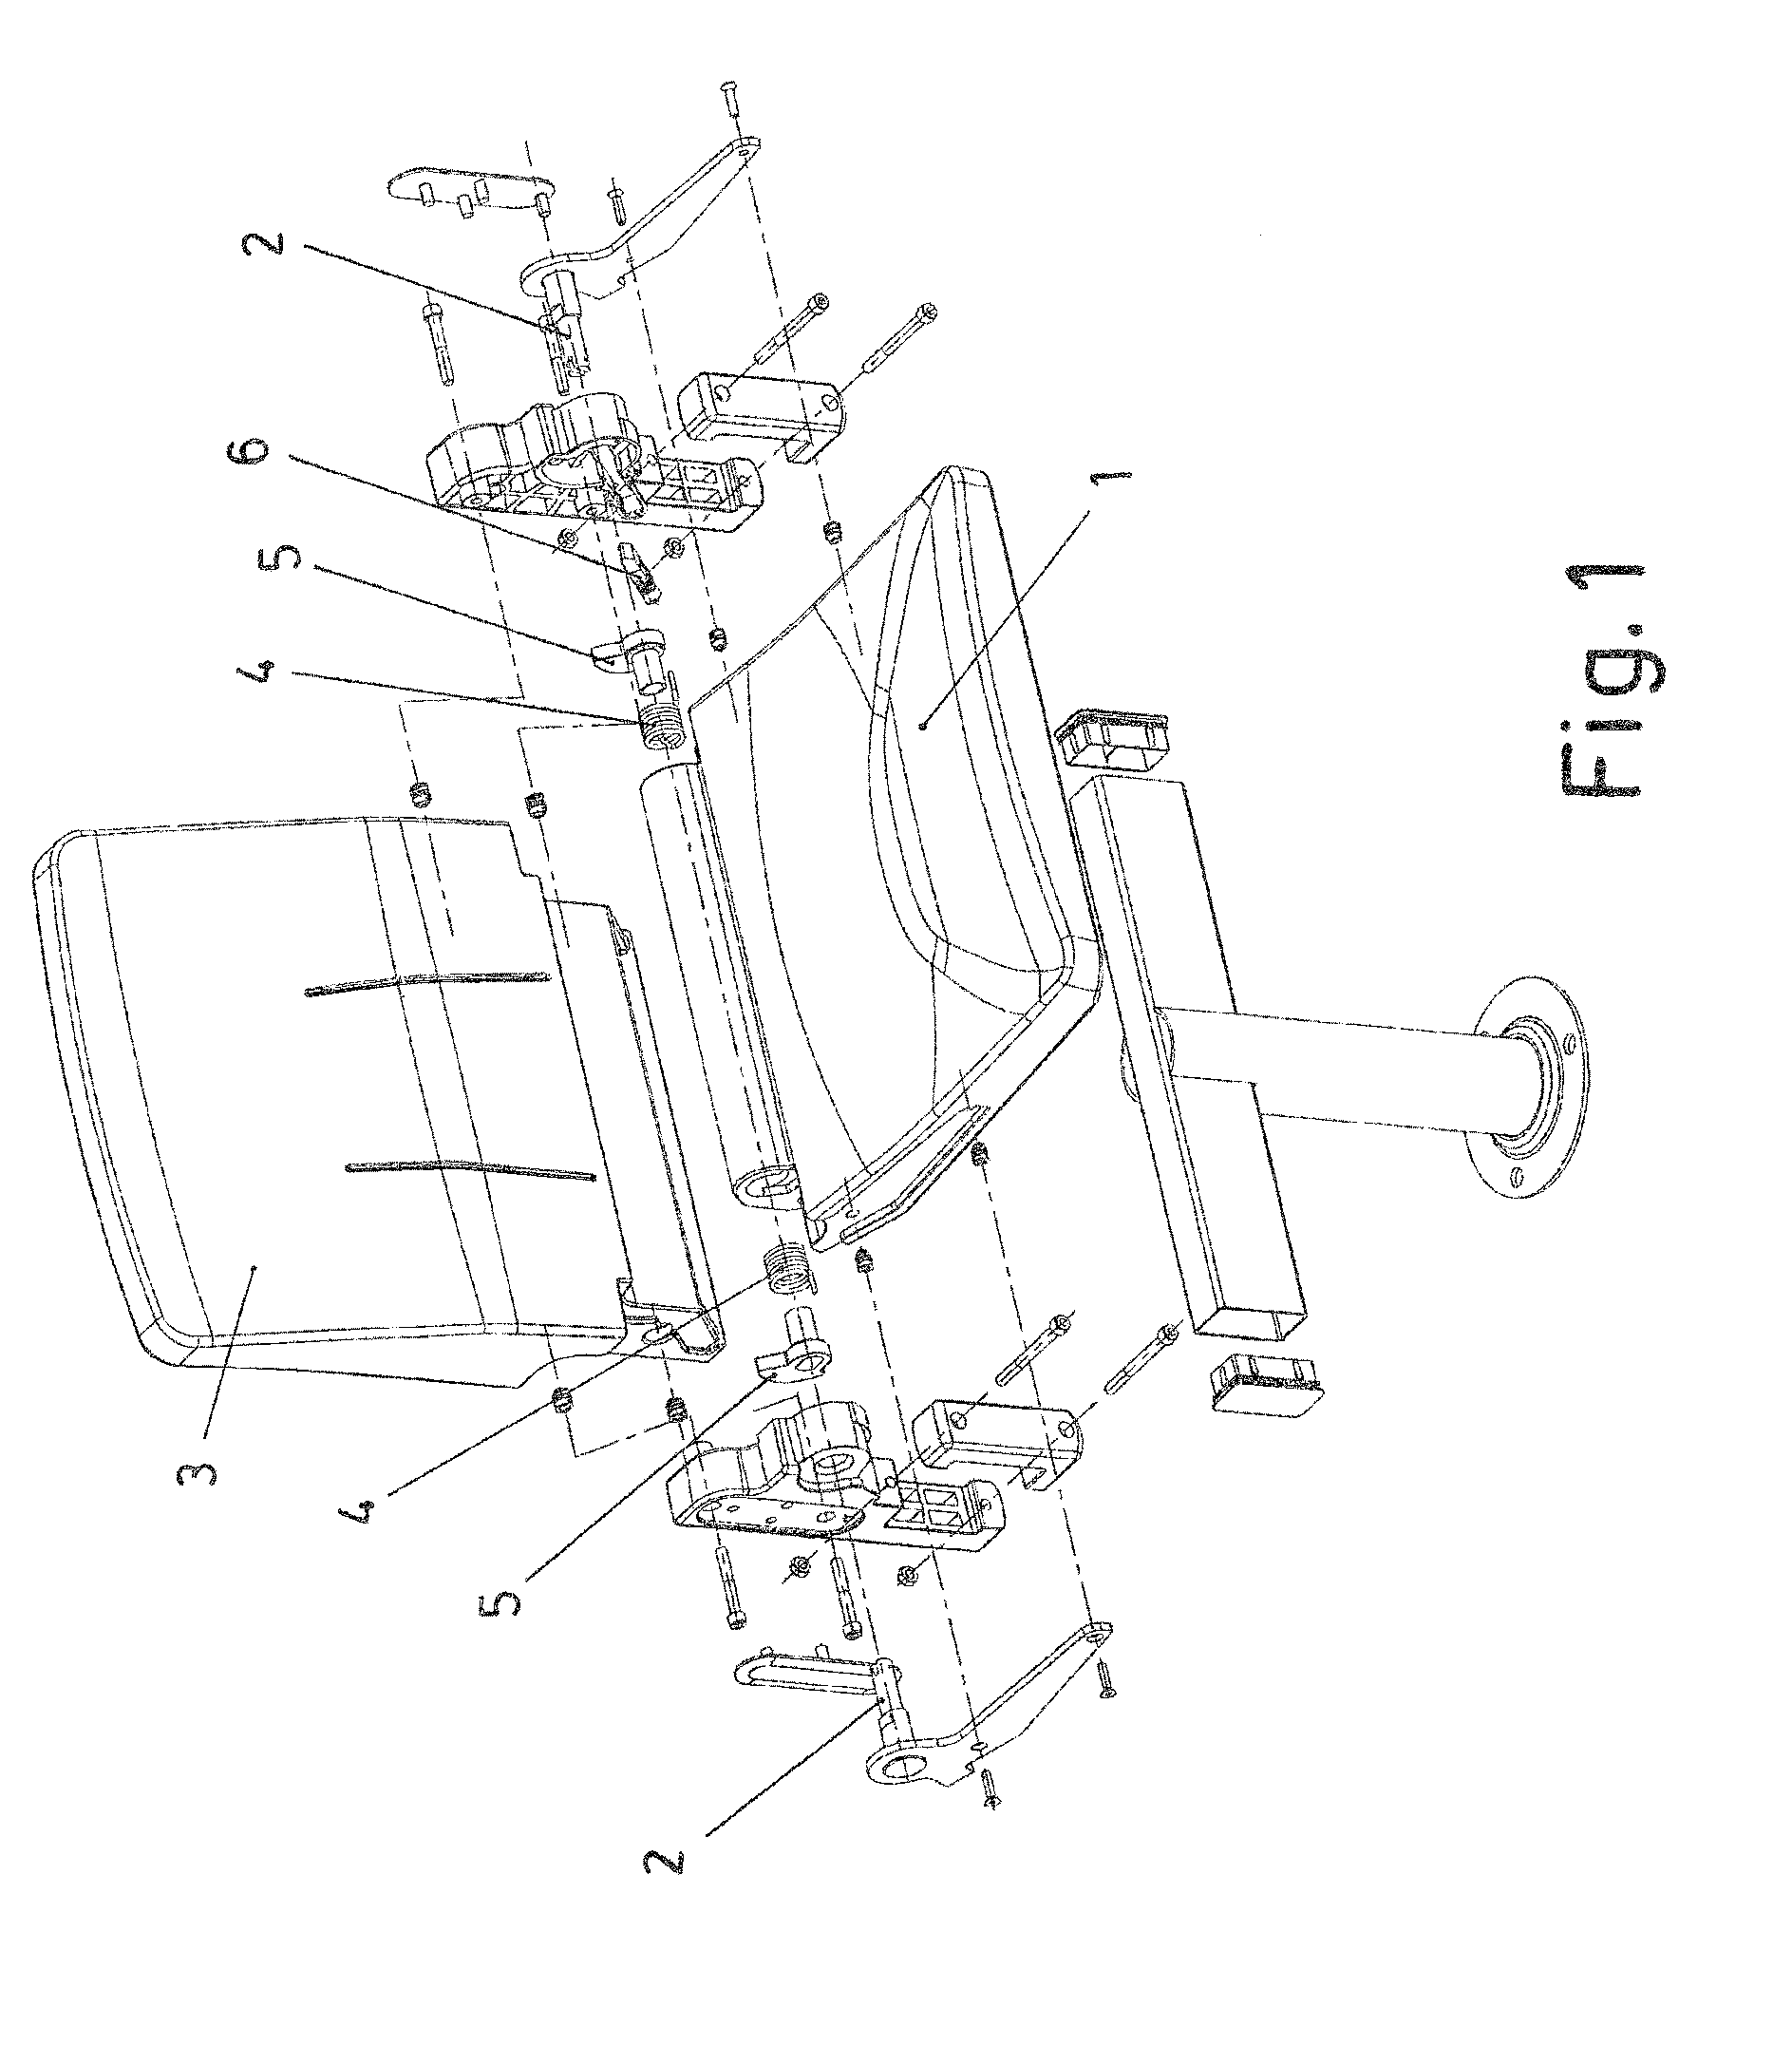 Damping mechanism for folding seats in chairs